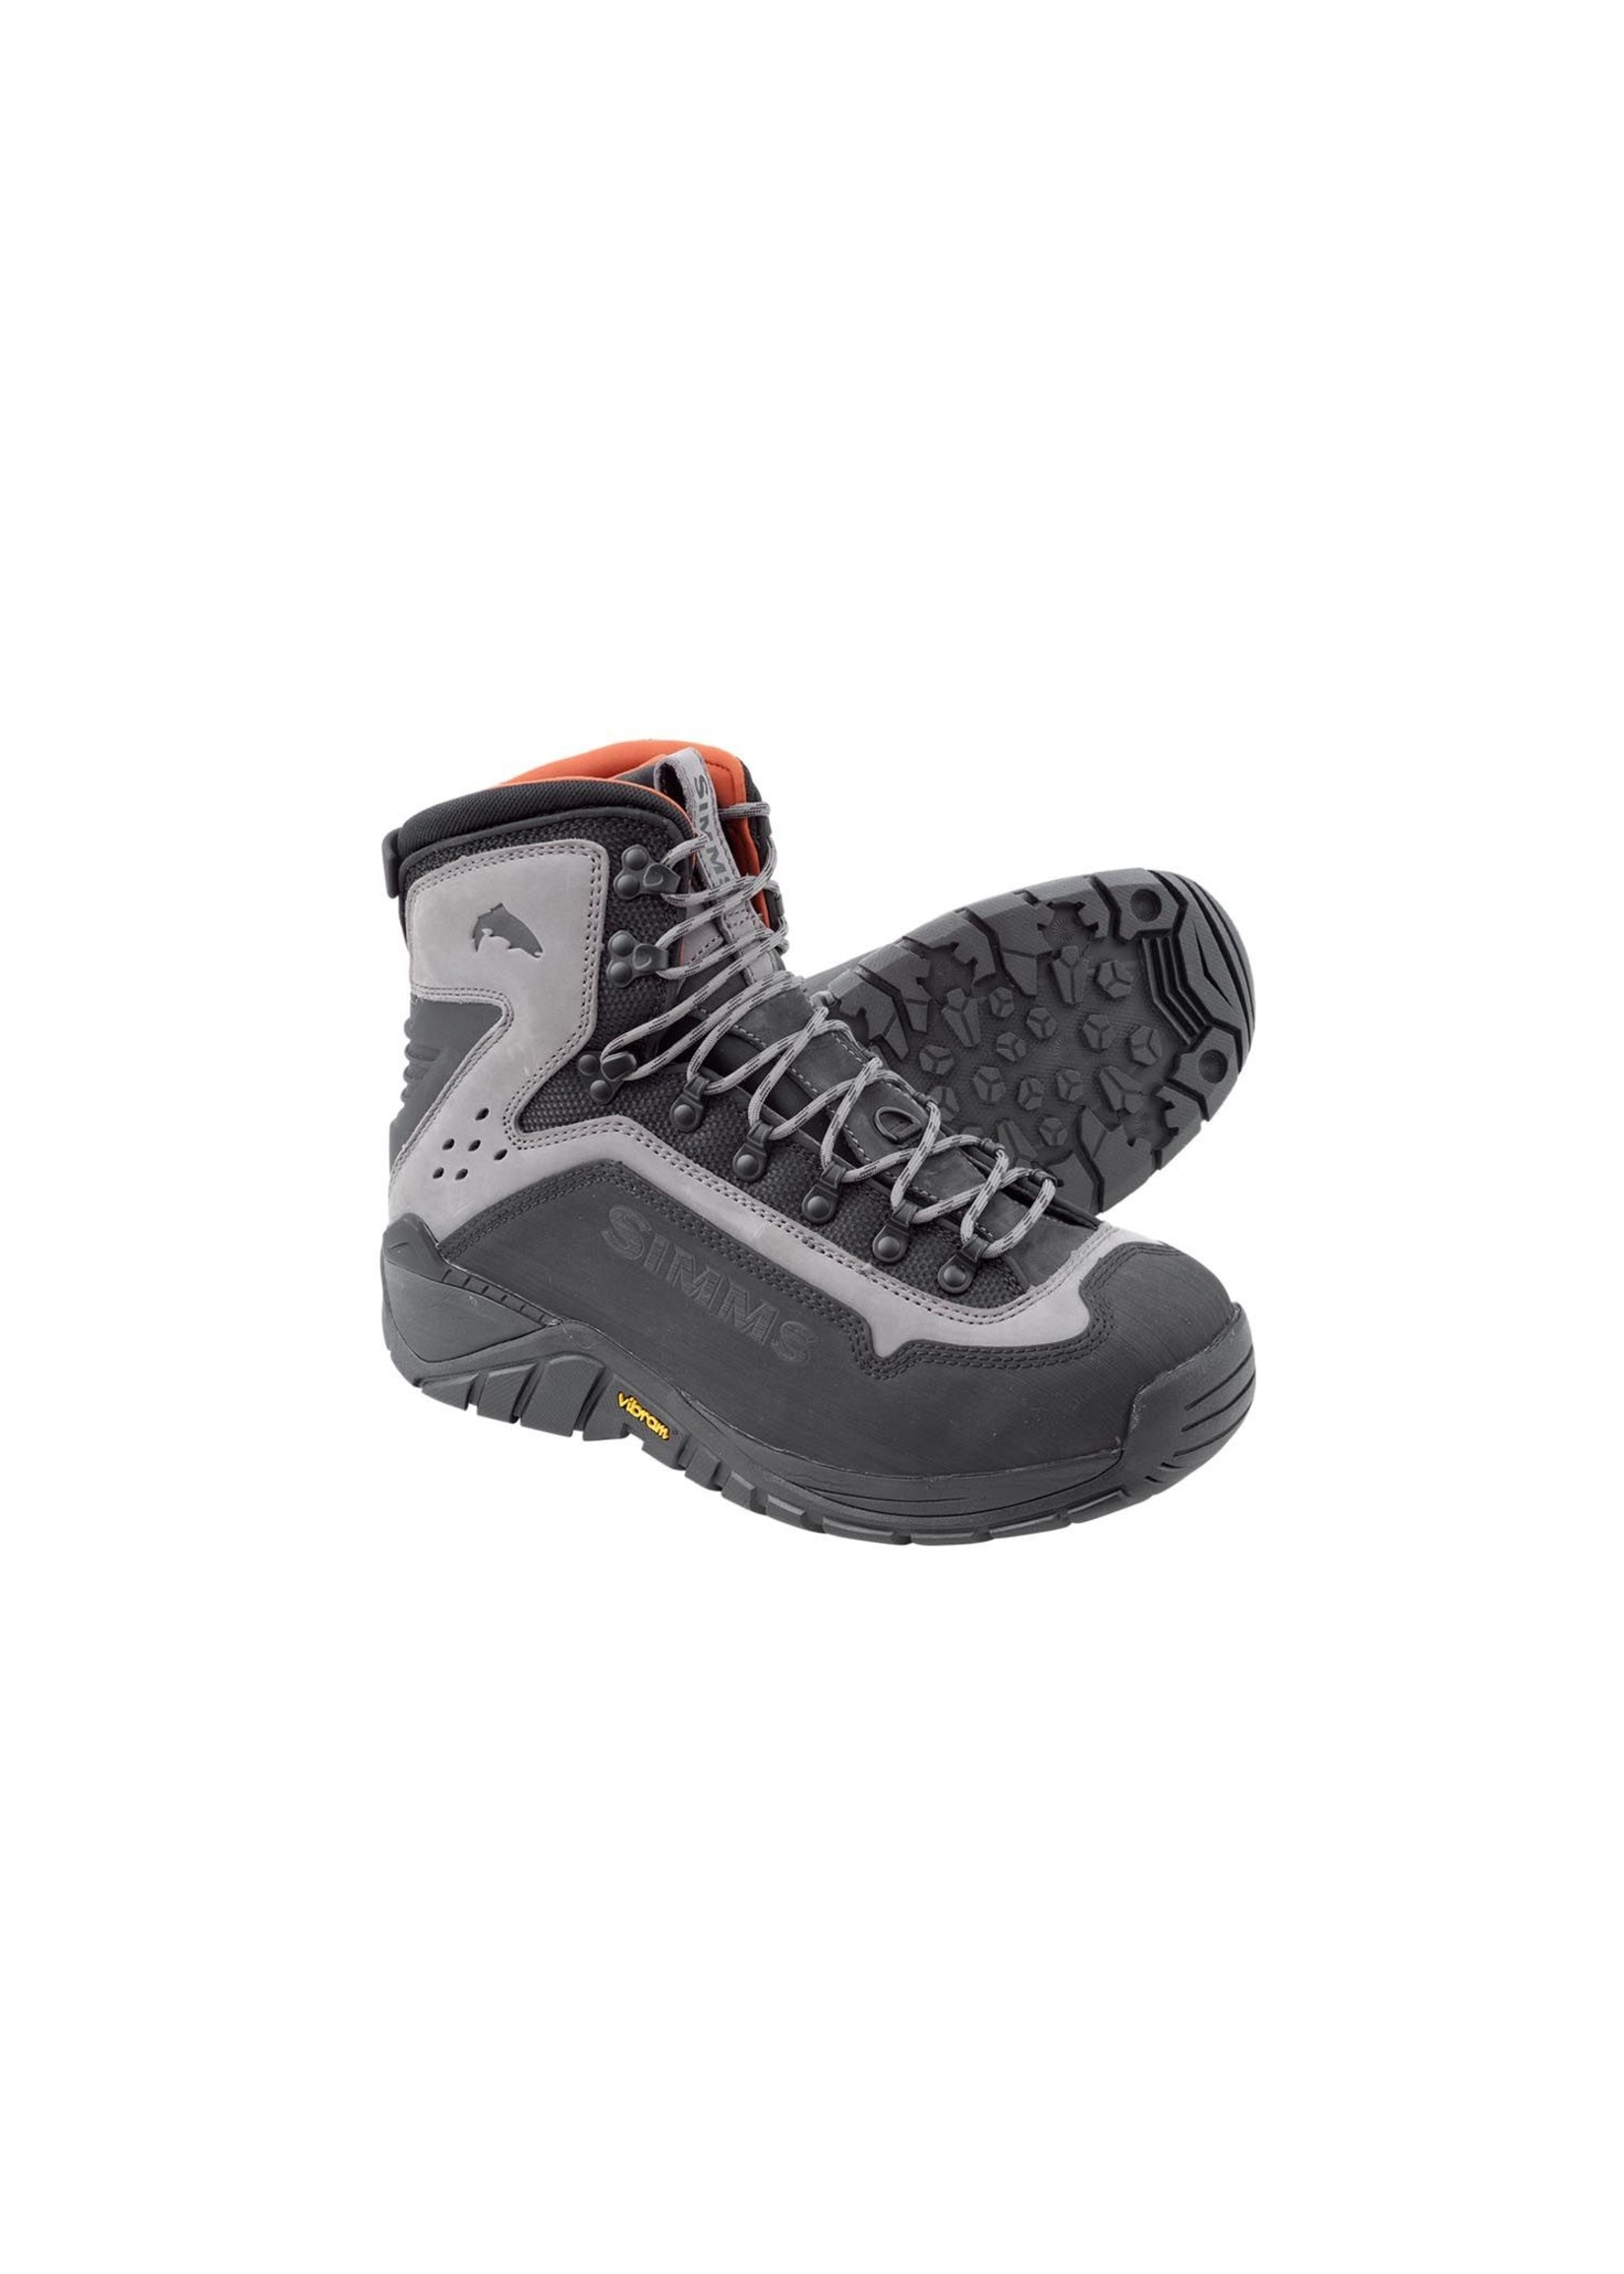 SIMMS G3 GUIDE BOOT